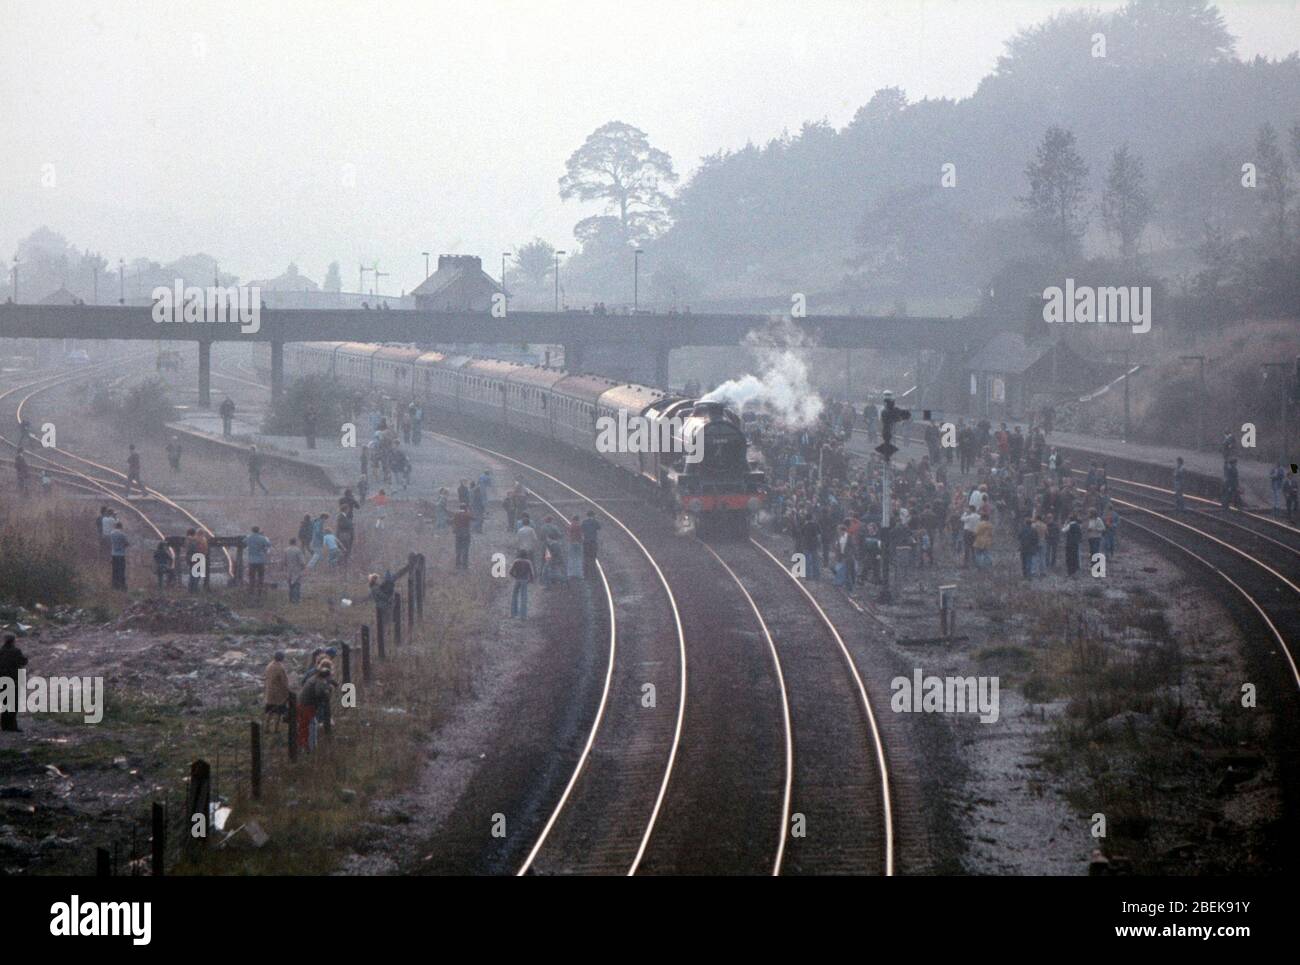 1975, train spotters watching a mainline steam train at Chinnley Edale, Northern England, UK Stock Photo